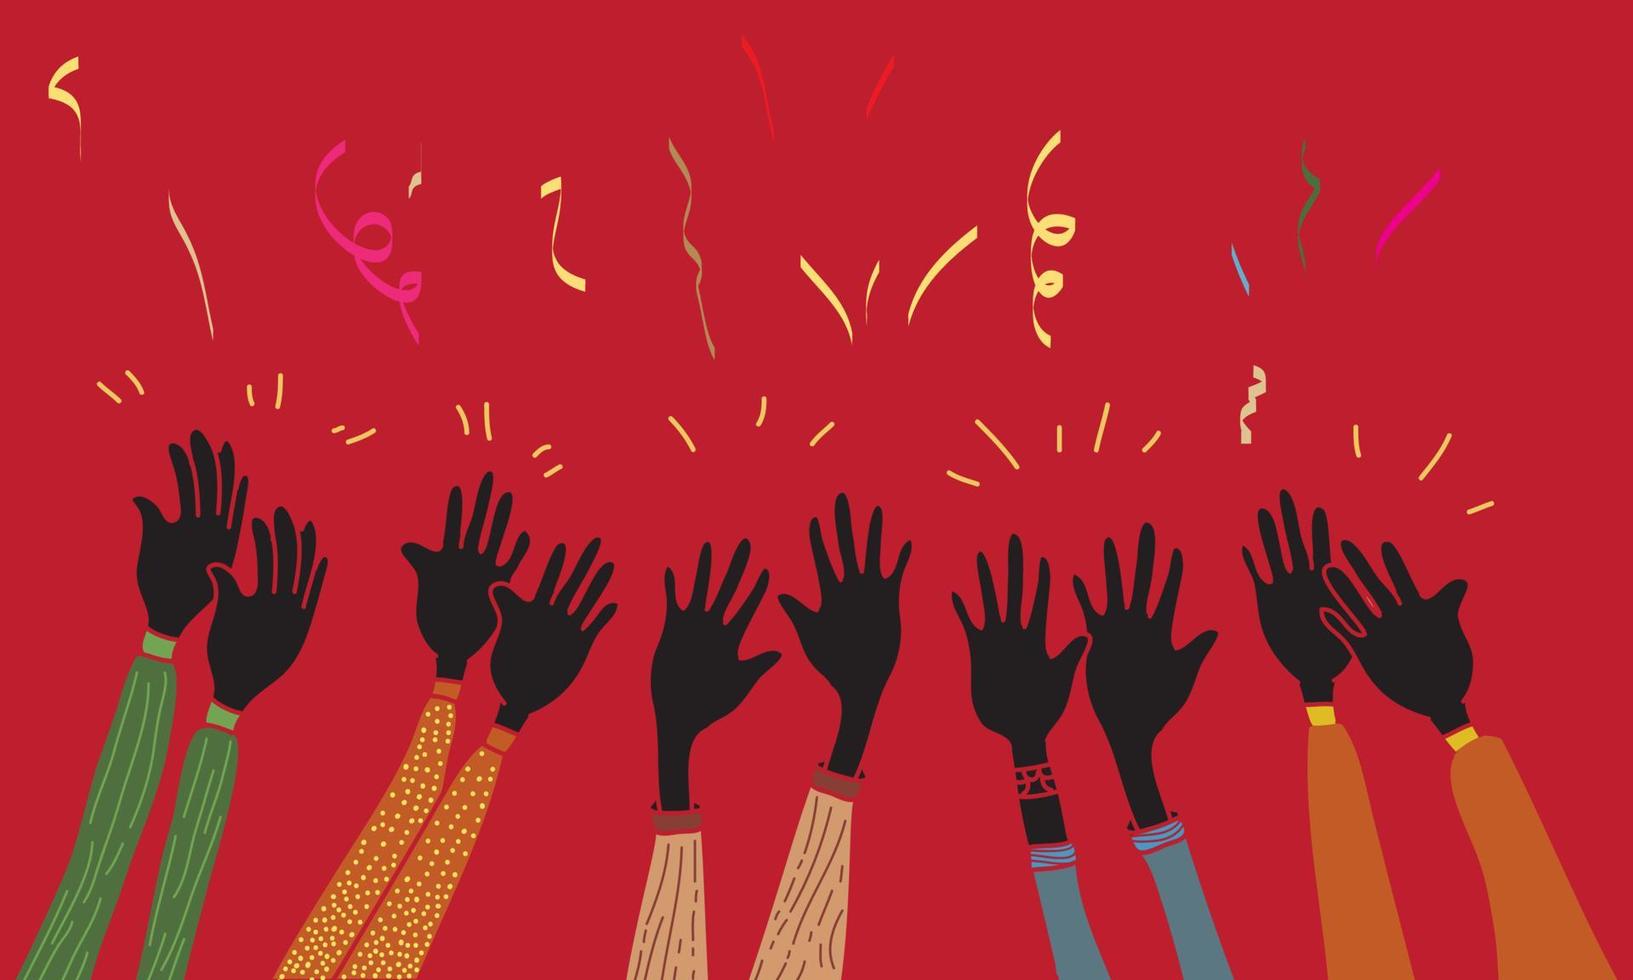 hand drawn of hands clapping ovation. applause, thumbs up gesture on doodle style, vector illustration